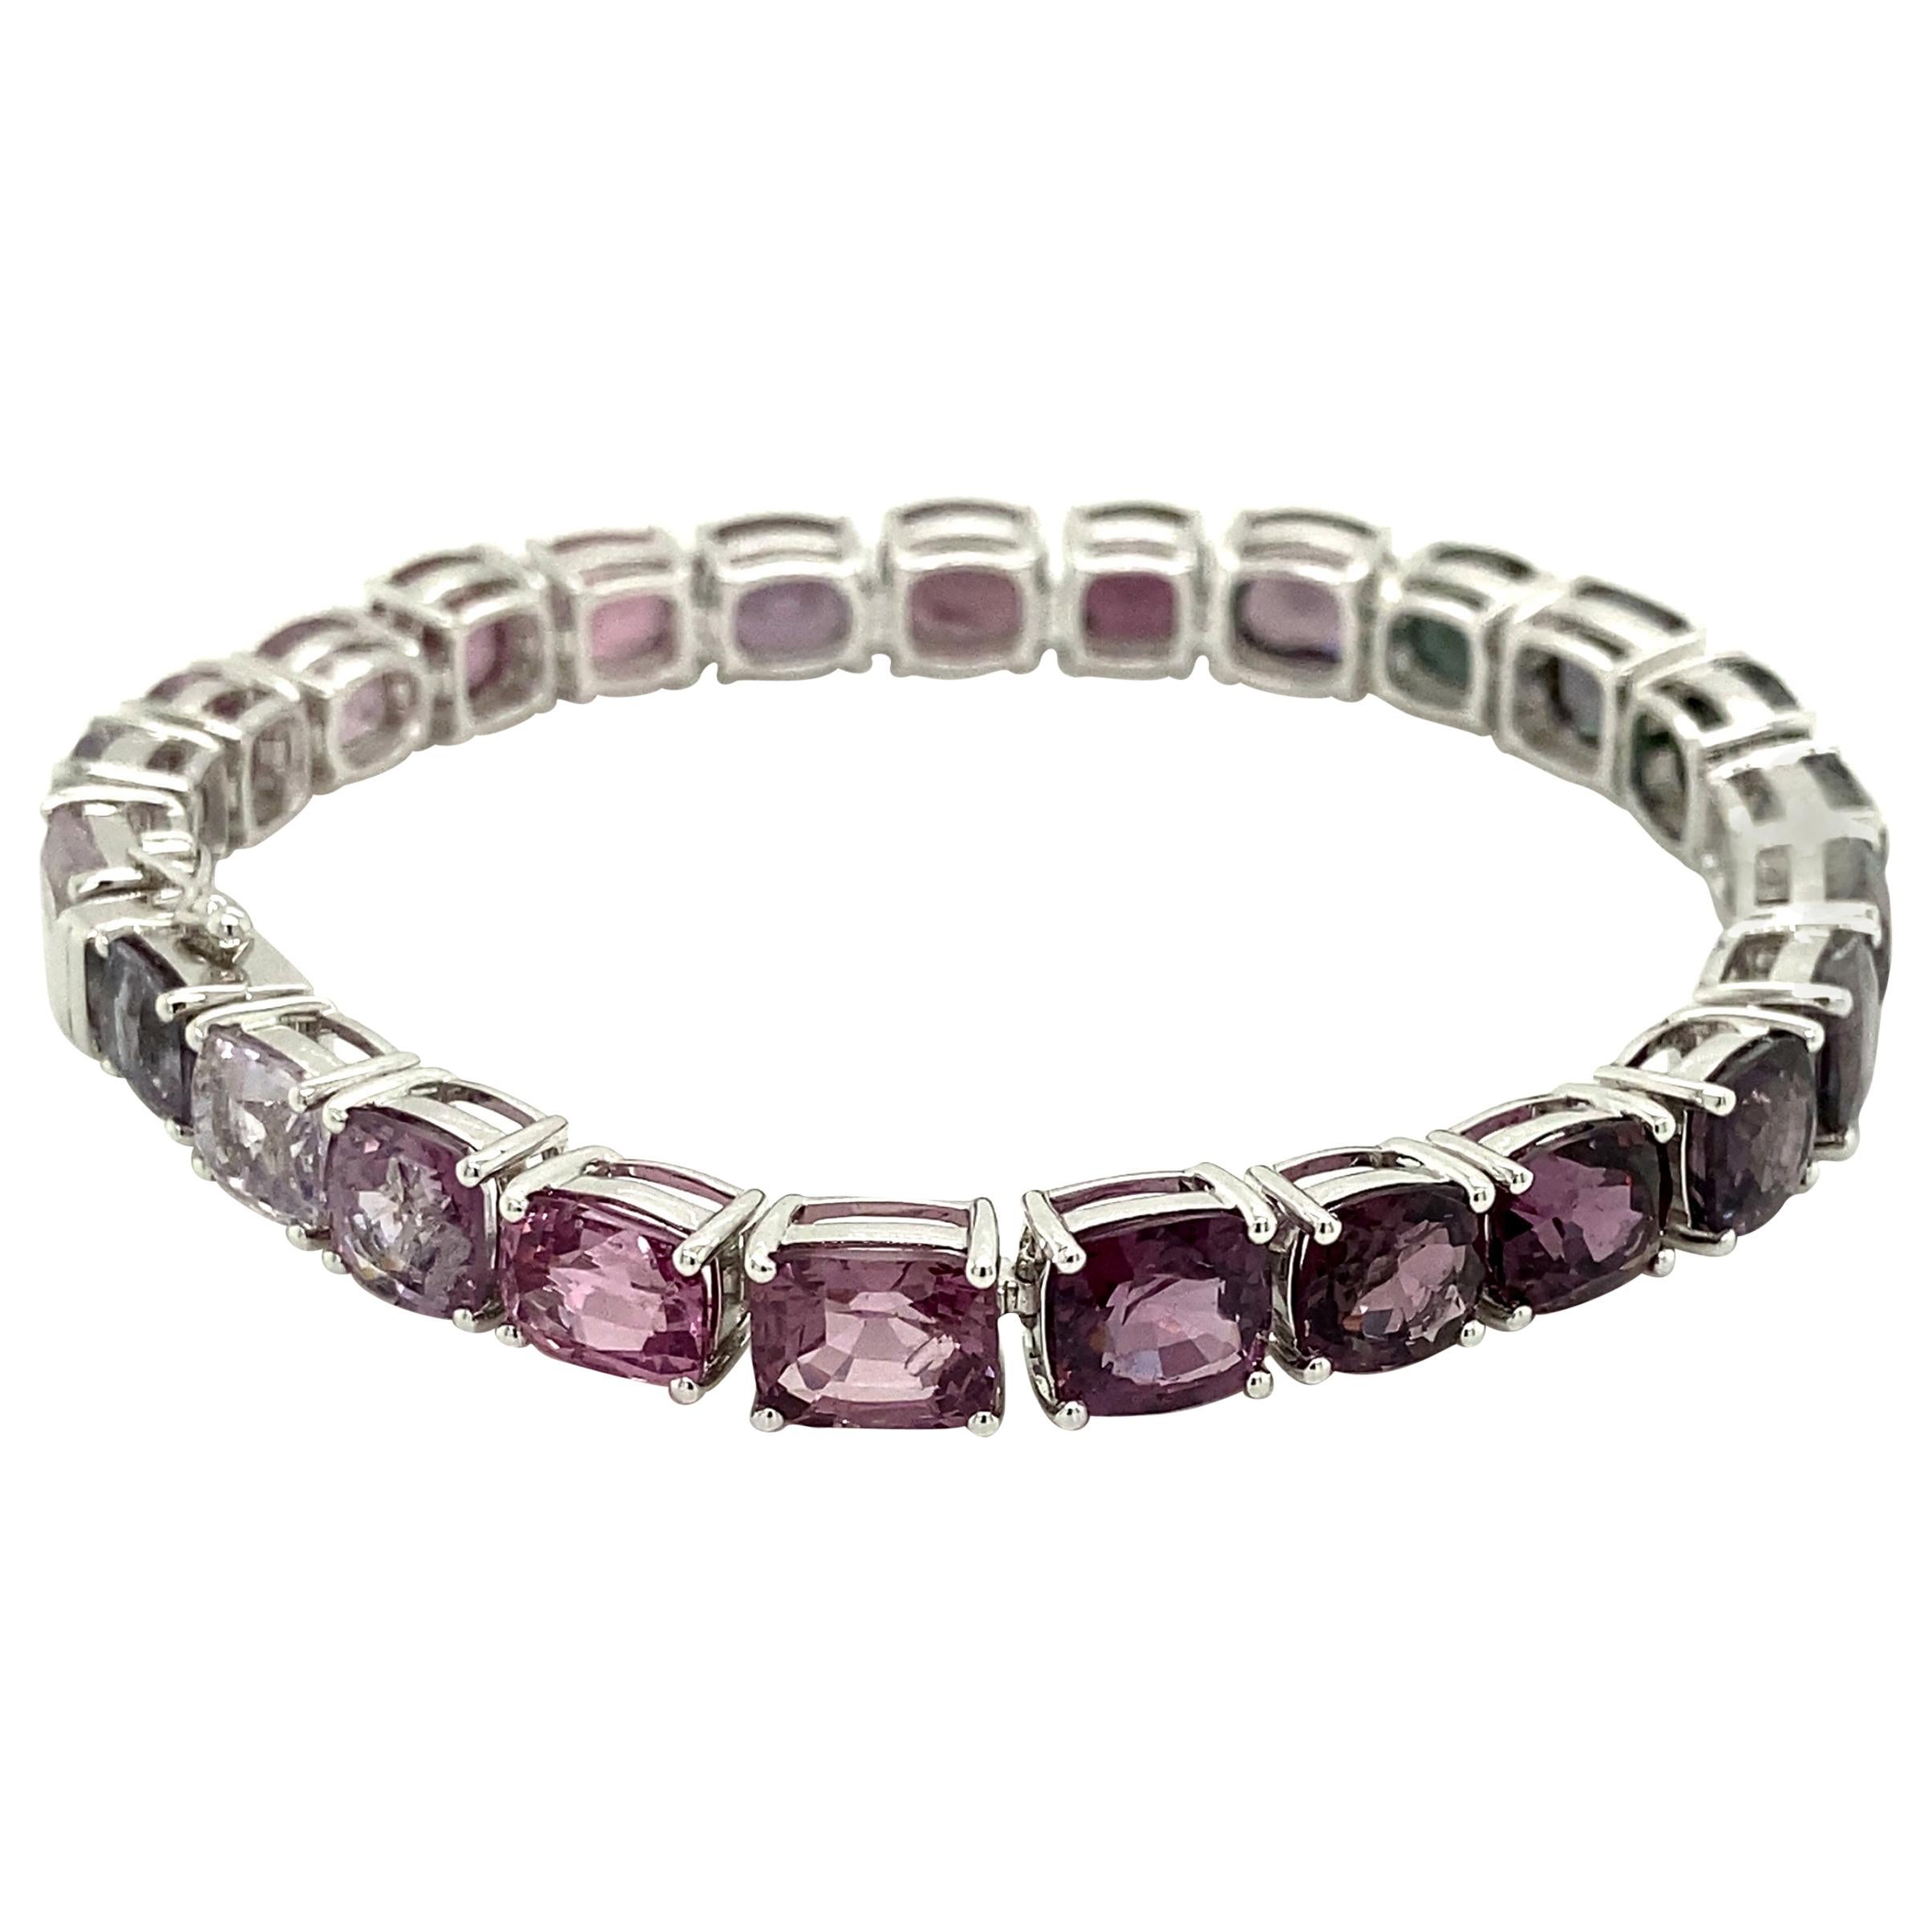 38.84 Carat Unheated Multicoloured Burmese Spinels White Gold Bracelet:

A beautiful bracelet, it features 25 luscious multicoloured unheated Burmese spinels weighing a total of 38.84 carat. The spinels, hailing from the legendary mines of Mogok,